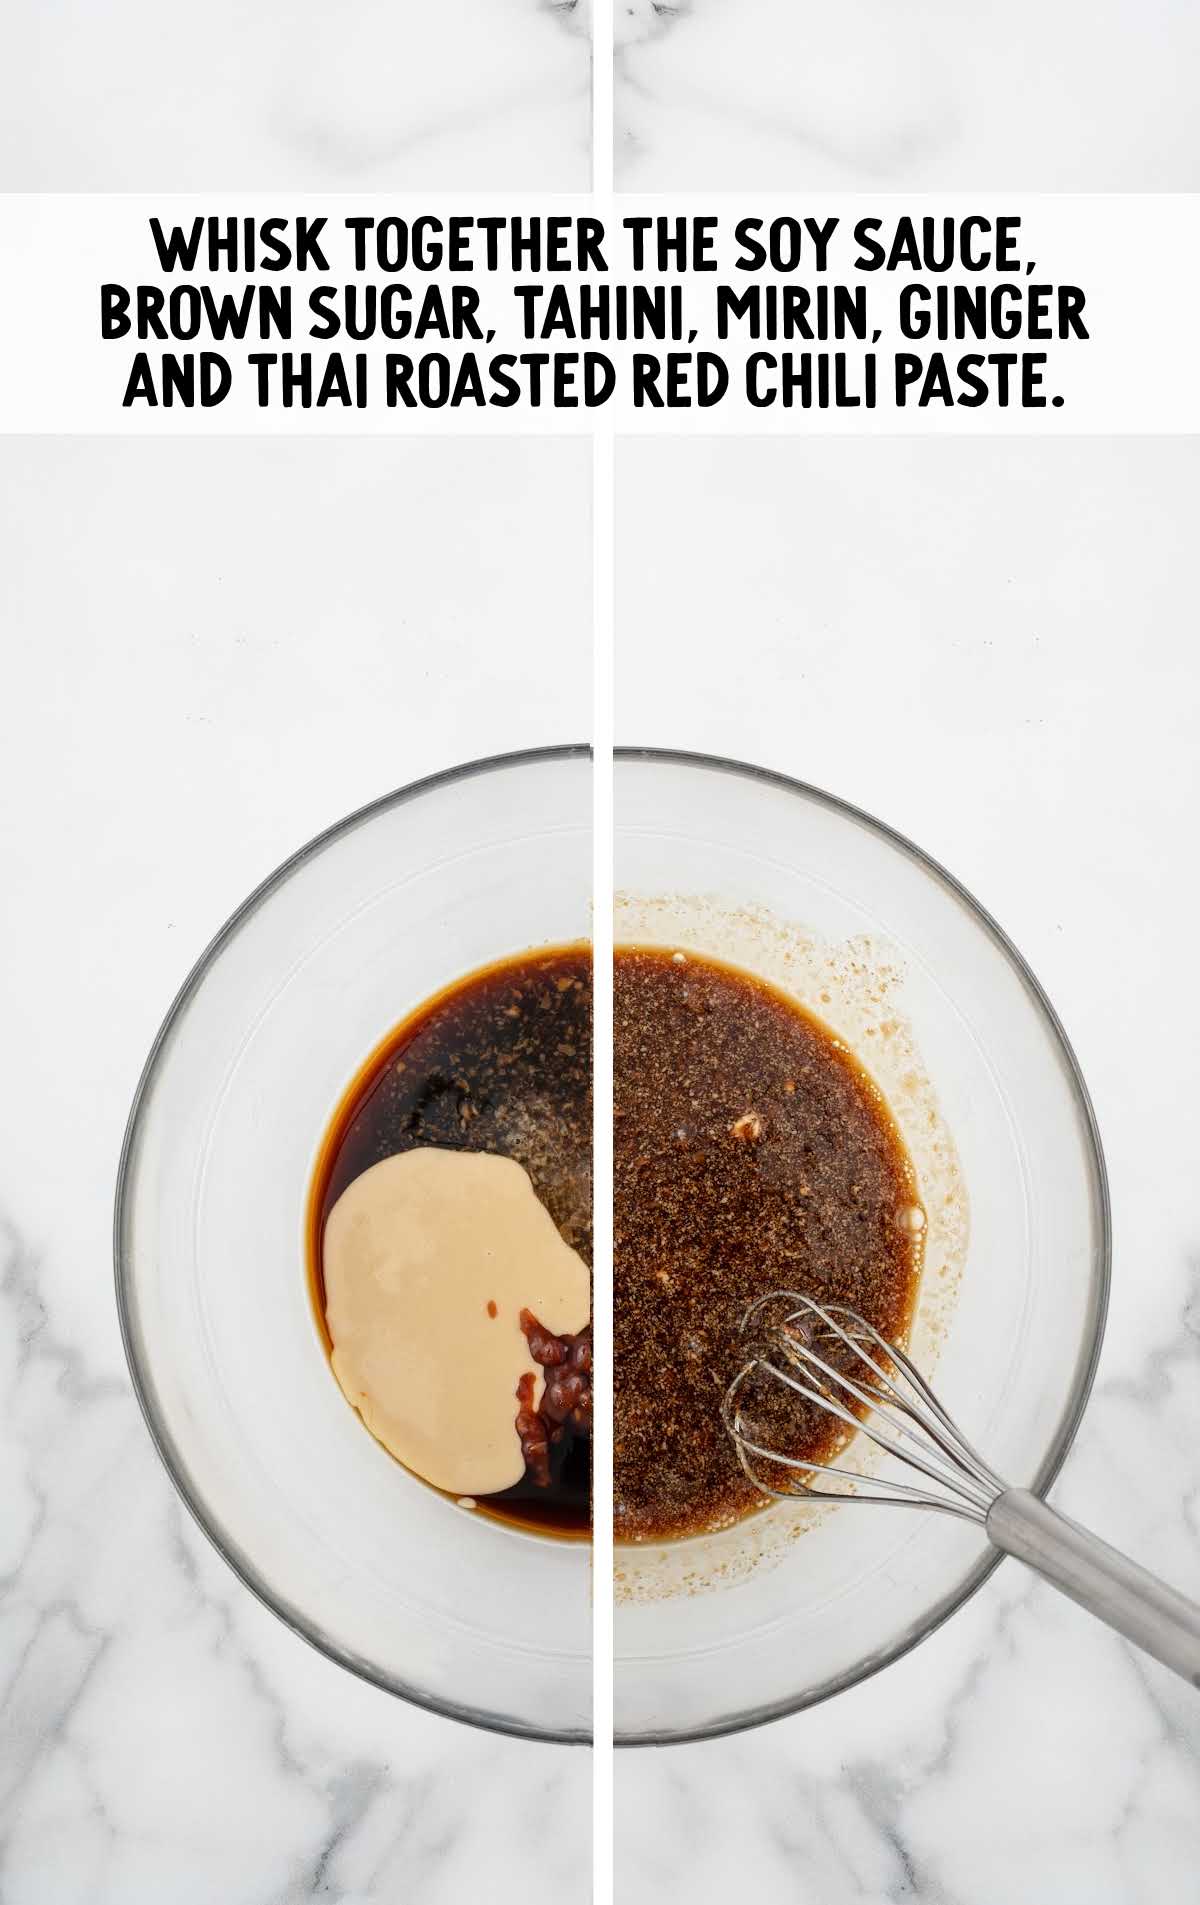 soy sauce, brown sugar, tahini, mirin ginger and thai roasted red chili paste whisked together